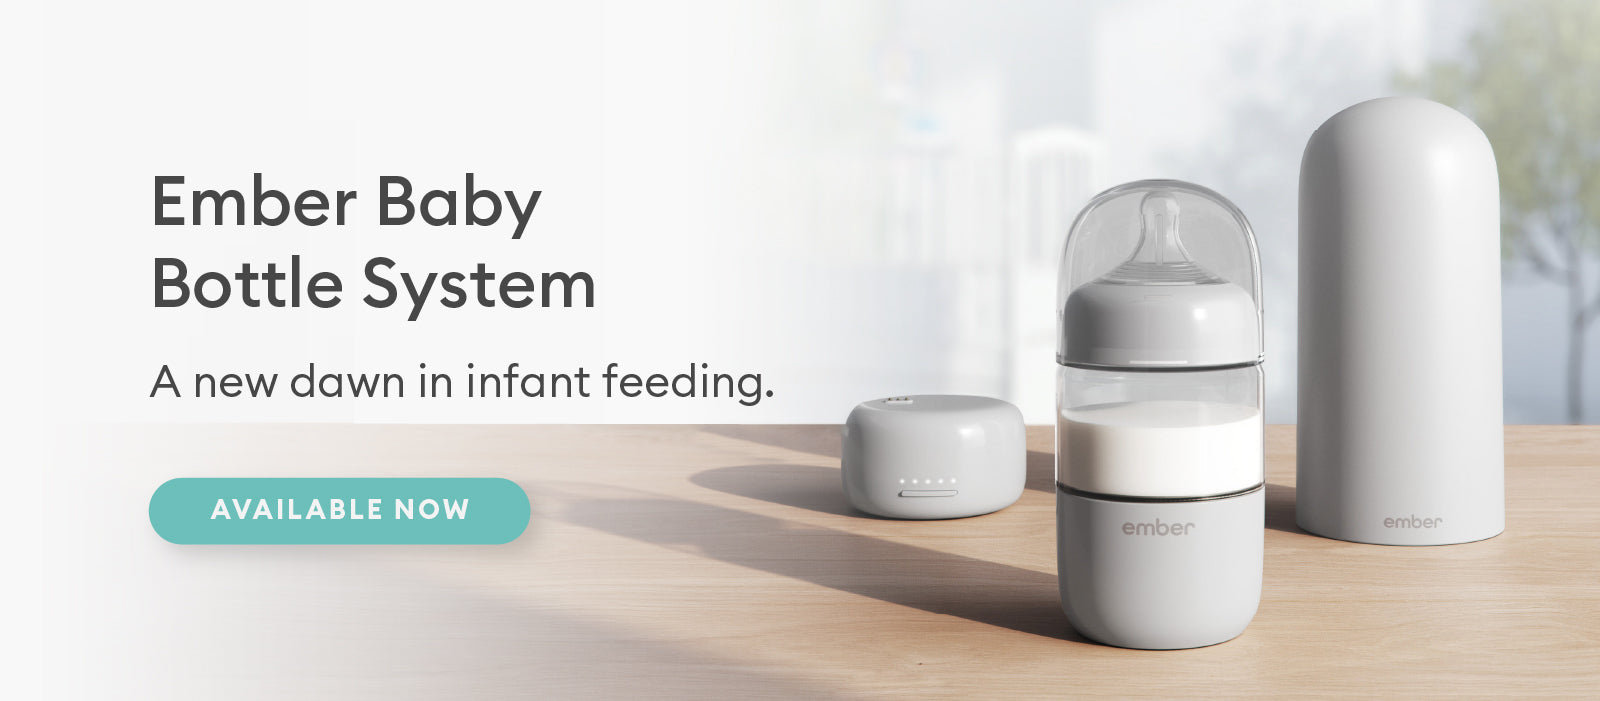 The Ember Baby Bottle System rests on a table top in a nursery.